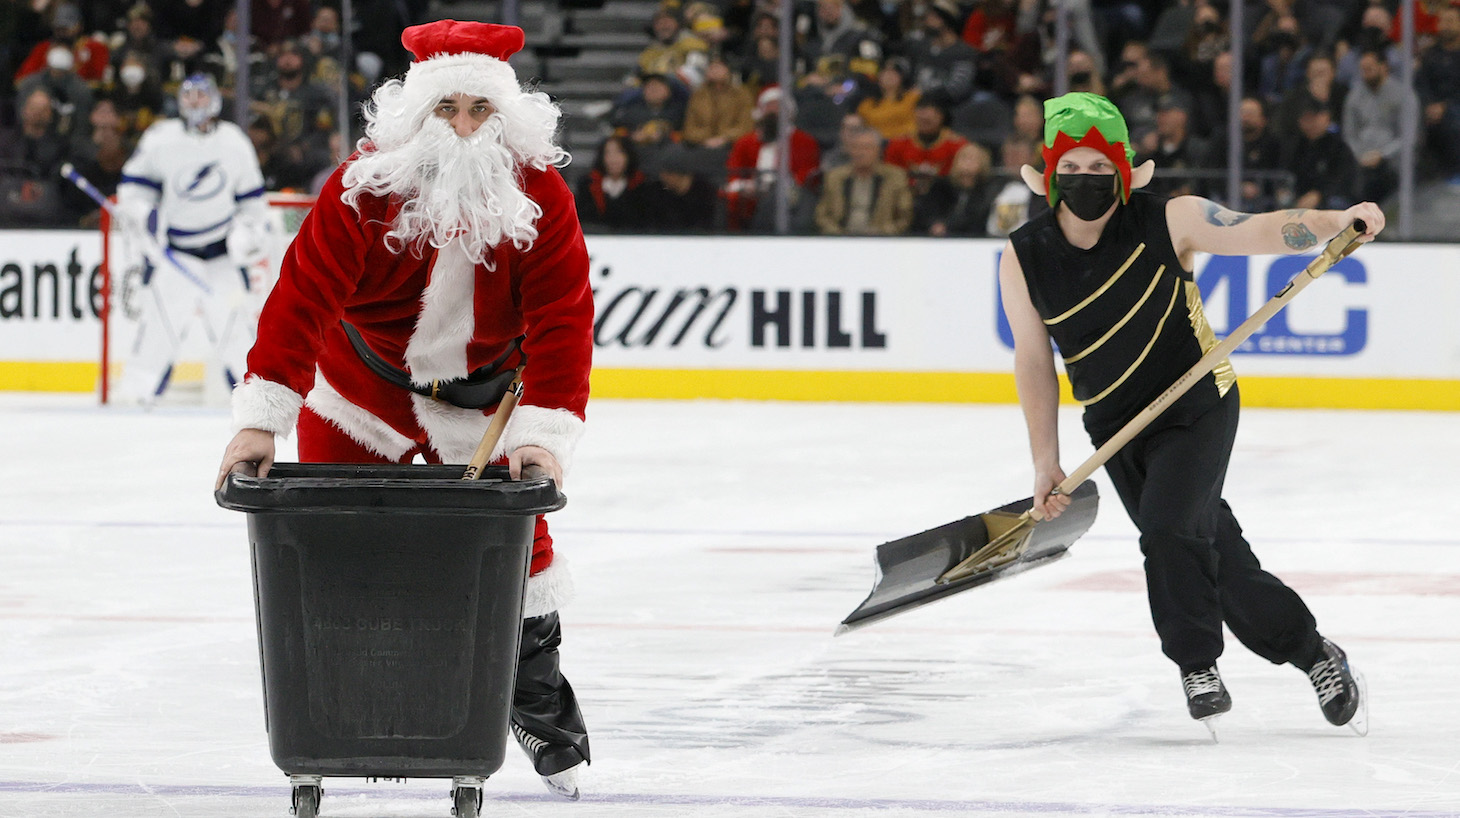 LAS VEGAS, NEVADA - DECEMBER 21: A member of the Knights Guard dressed as Santa Claus and another wearing an elf hat clean the ice during the Vegas Golden Knights' game against the Tampa Bay Lightning at T-Mobile Arena on December 21, 2021 in Las Vegas, Nevada. The Lightning defeated the Golden Knights 4-3. (Photo by Ethan Miller/Getty Images)